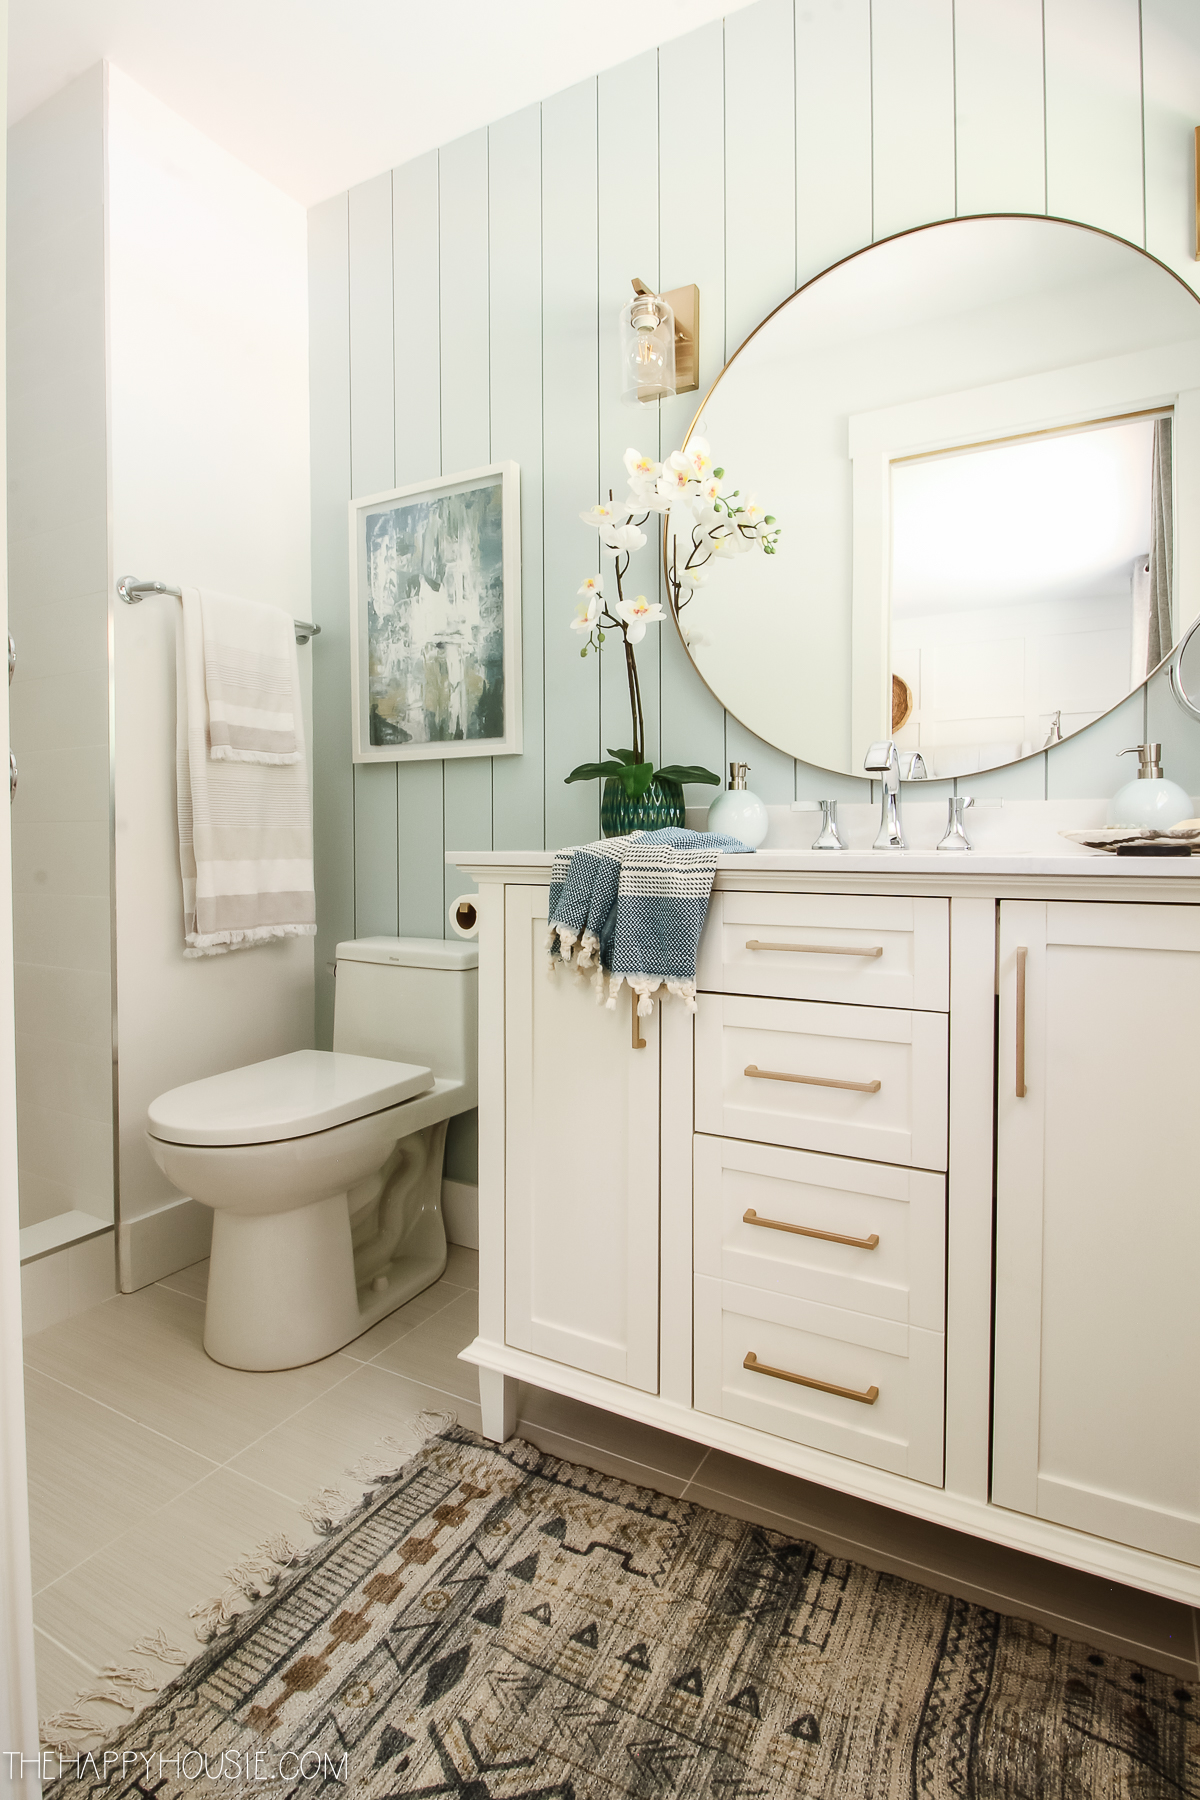 White cabinets are in the bathroom with an aqua shiplap wall.